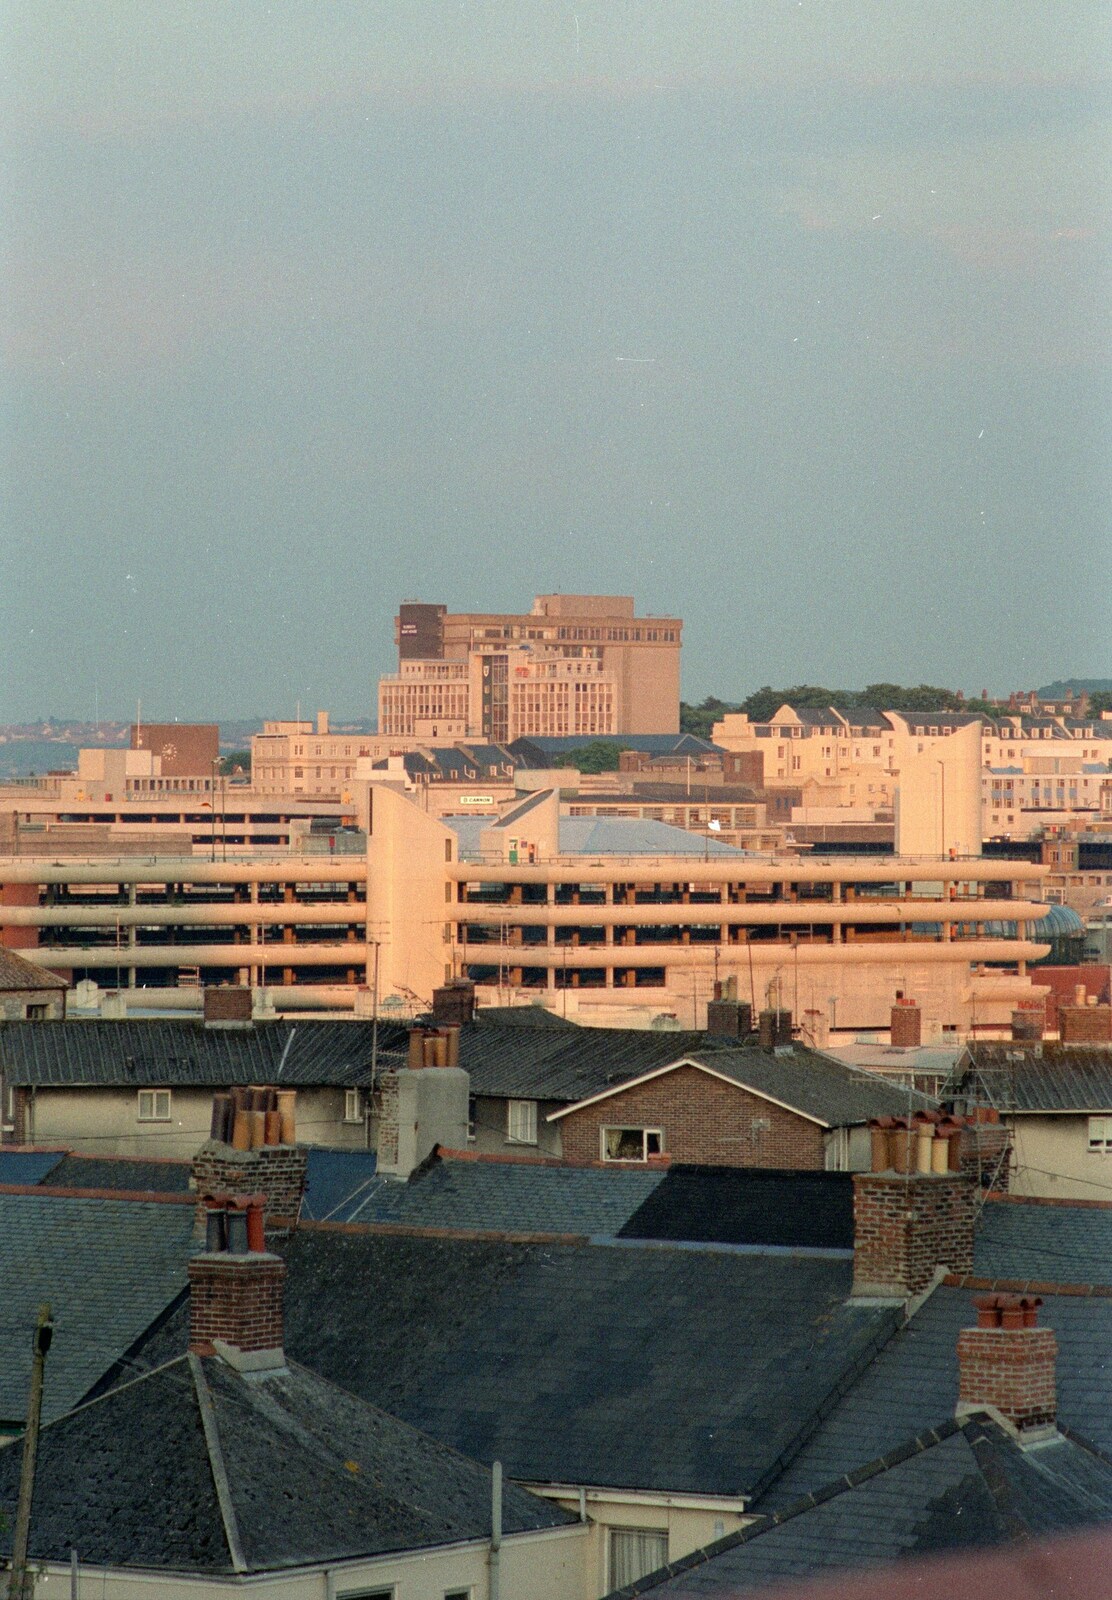 The Holiday Inn hotel from Uni: Views From St. Peter's Church Tower, Wyndham Square, Plymouth, Devon - 15th June 1989